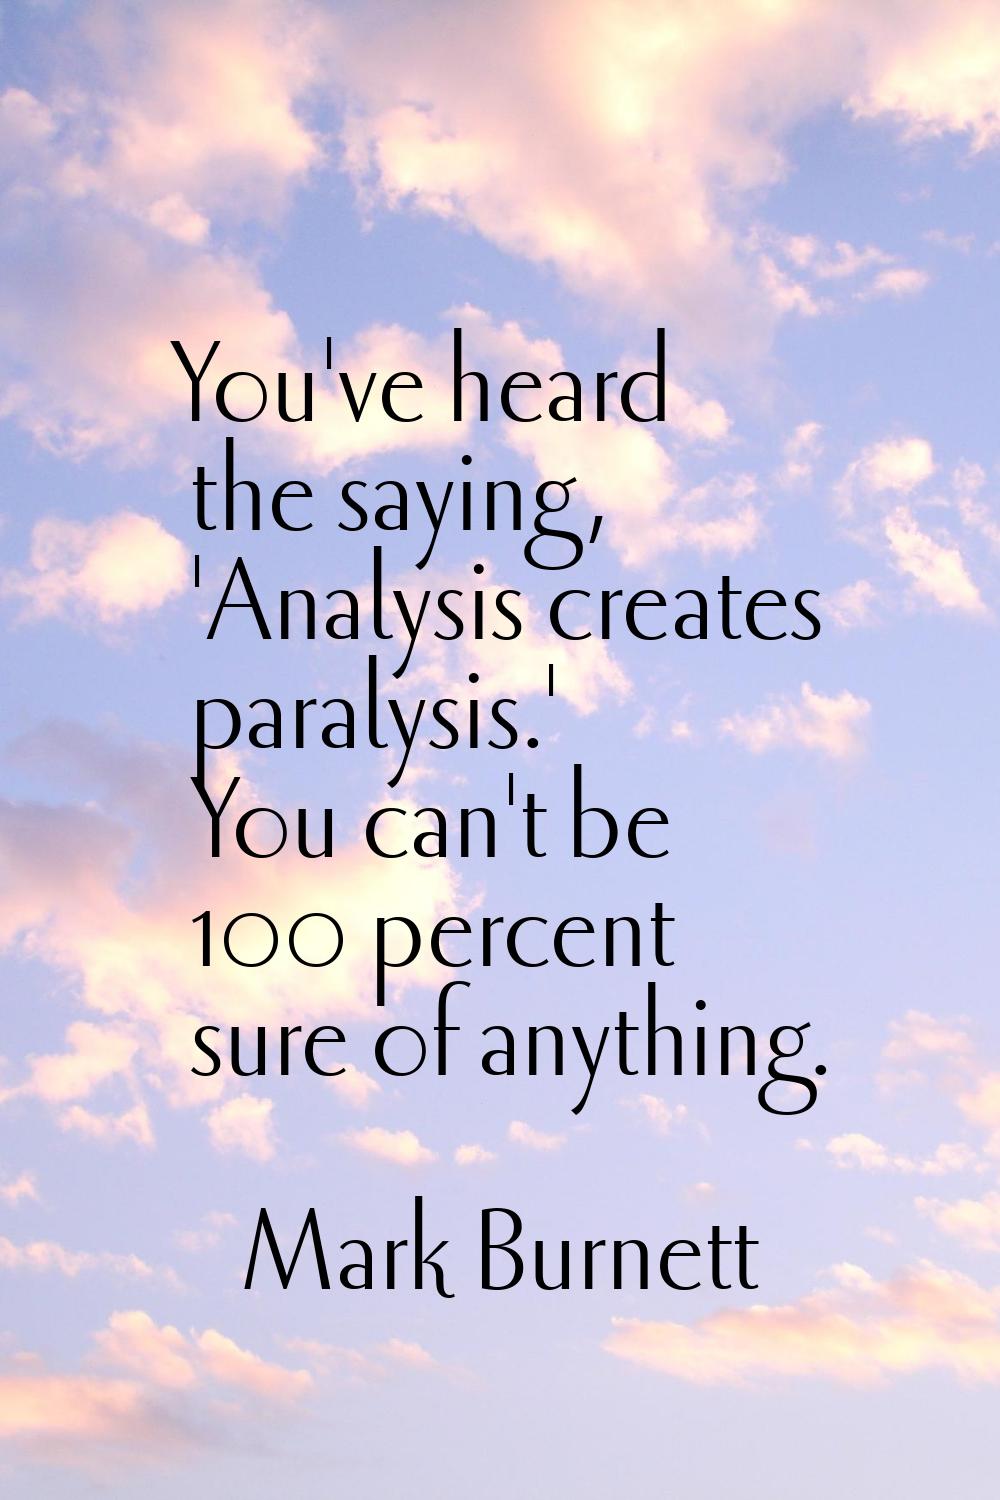 You've heard the saying, 'Analysis creates paralysis.' You can't be 100 percent sure of anything.